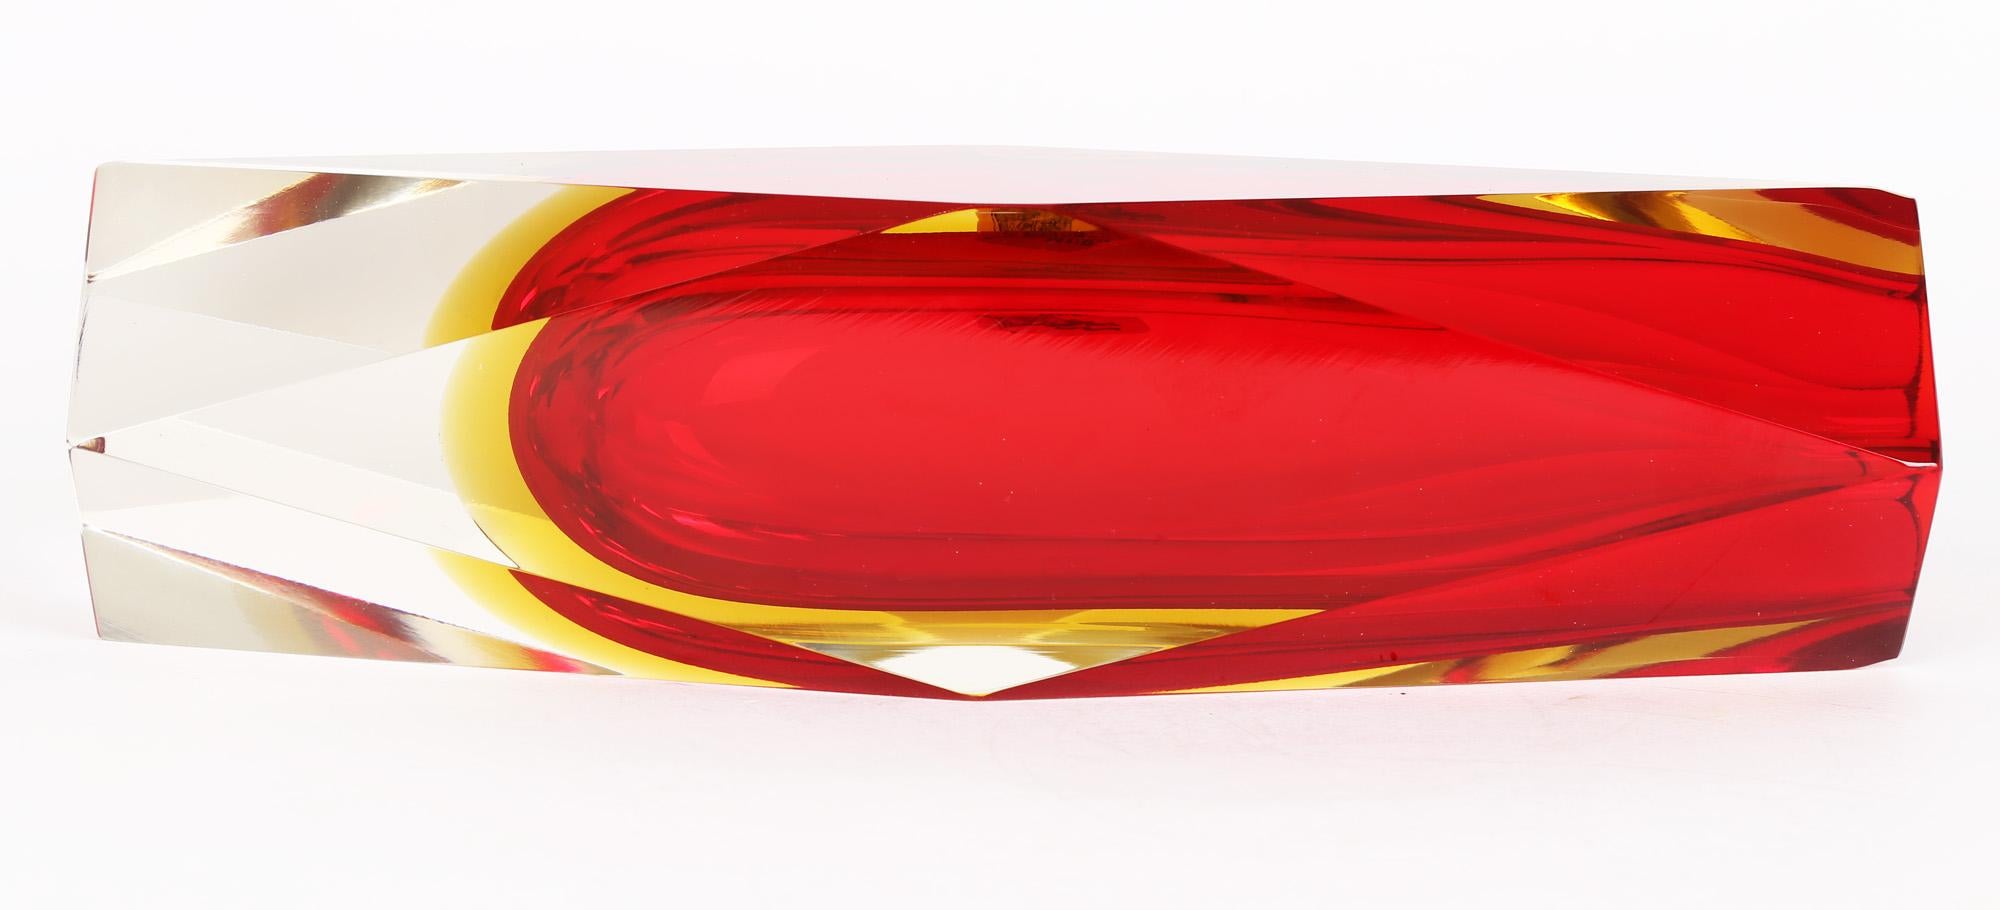 Mid-Century Modern Pagnin & Bon Italian Murano Red and Yellow Sommerso Facet Cut Glass Vase For Sale